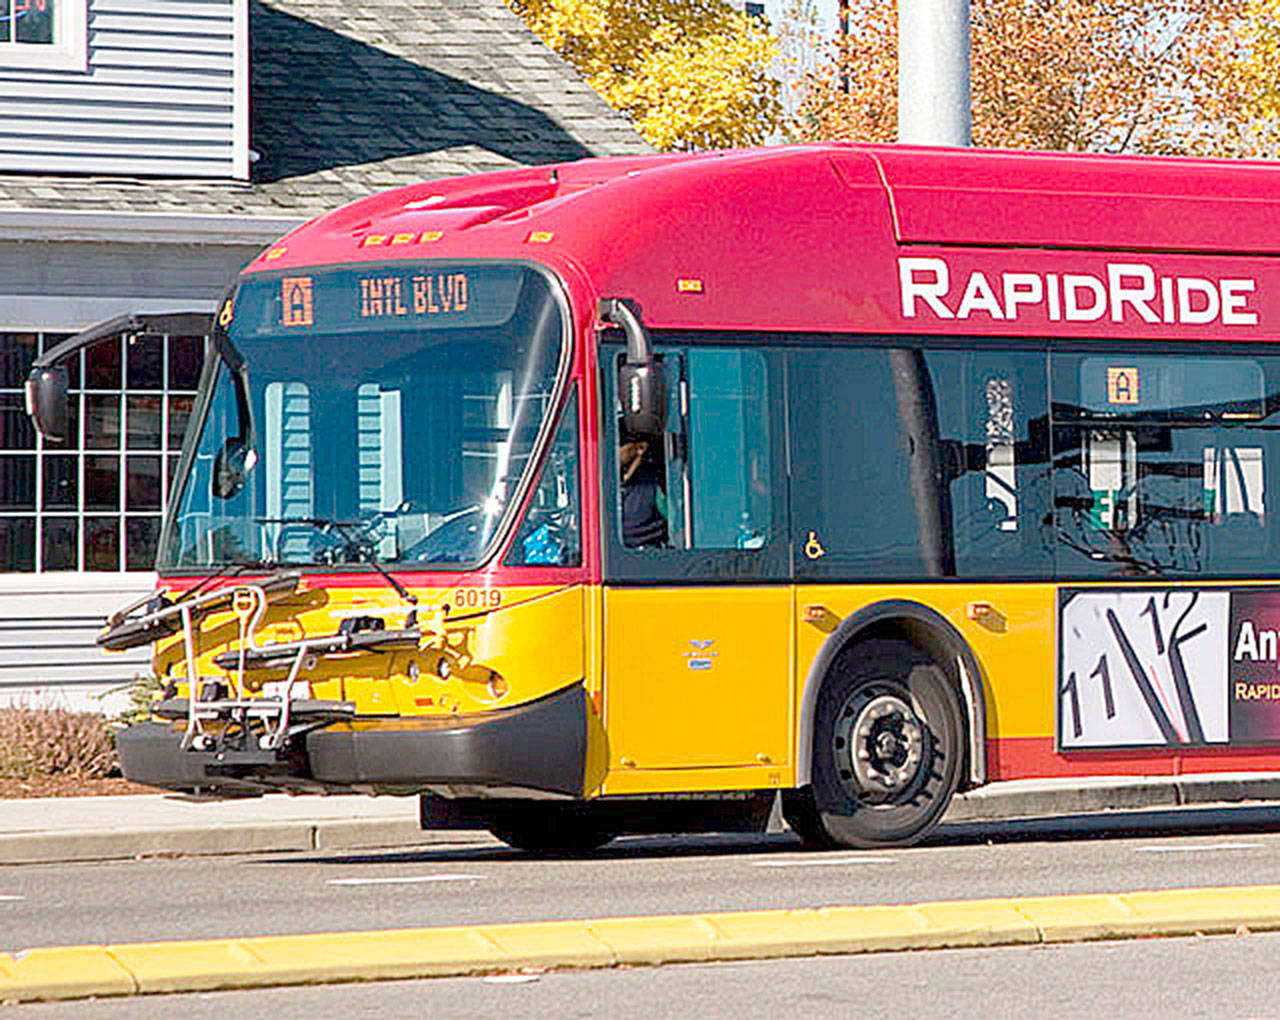 King County Metro plans to expand its RapidRide line in 2023 to connect Auburn, Kent and Renton. COURTESY PHOTO, King County Metro